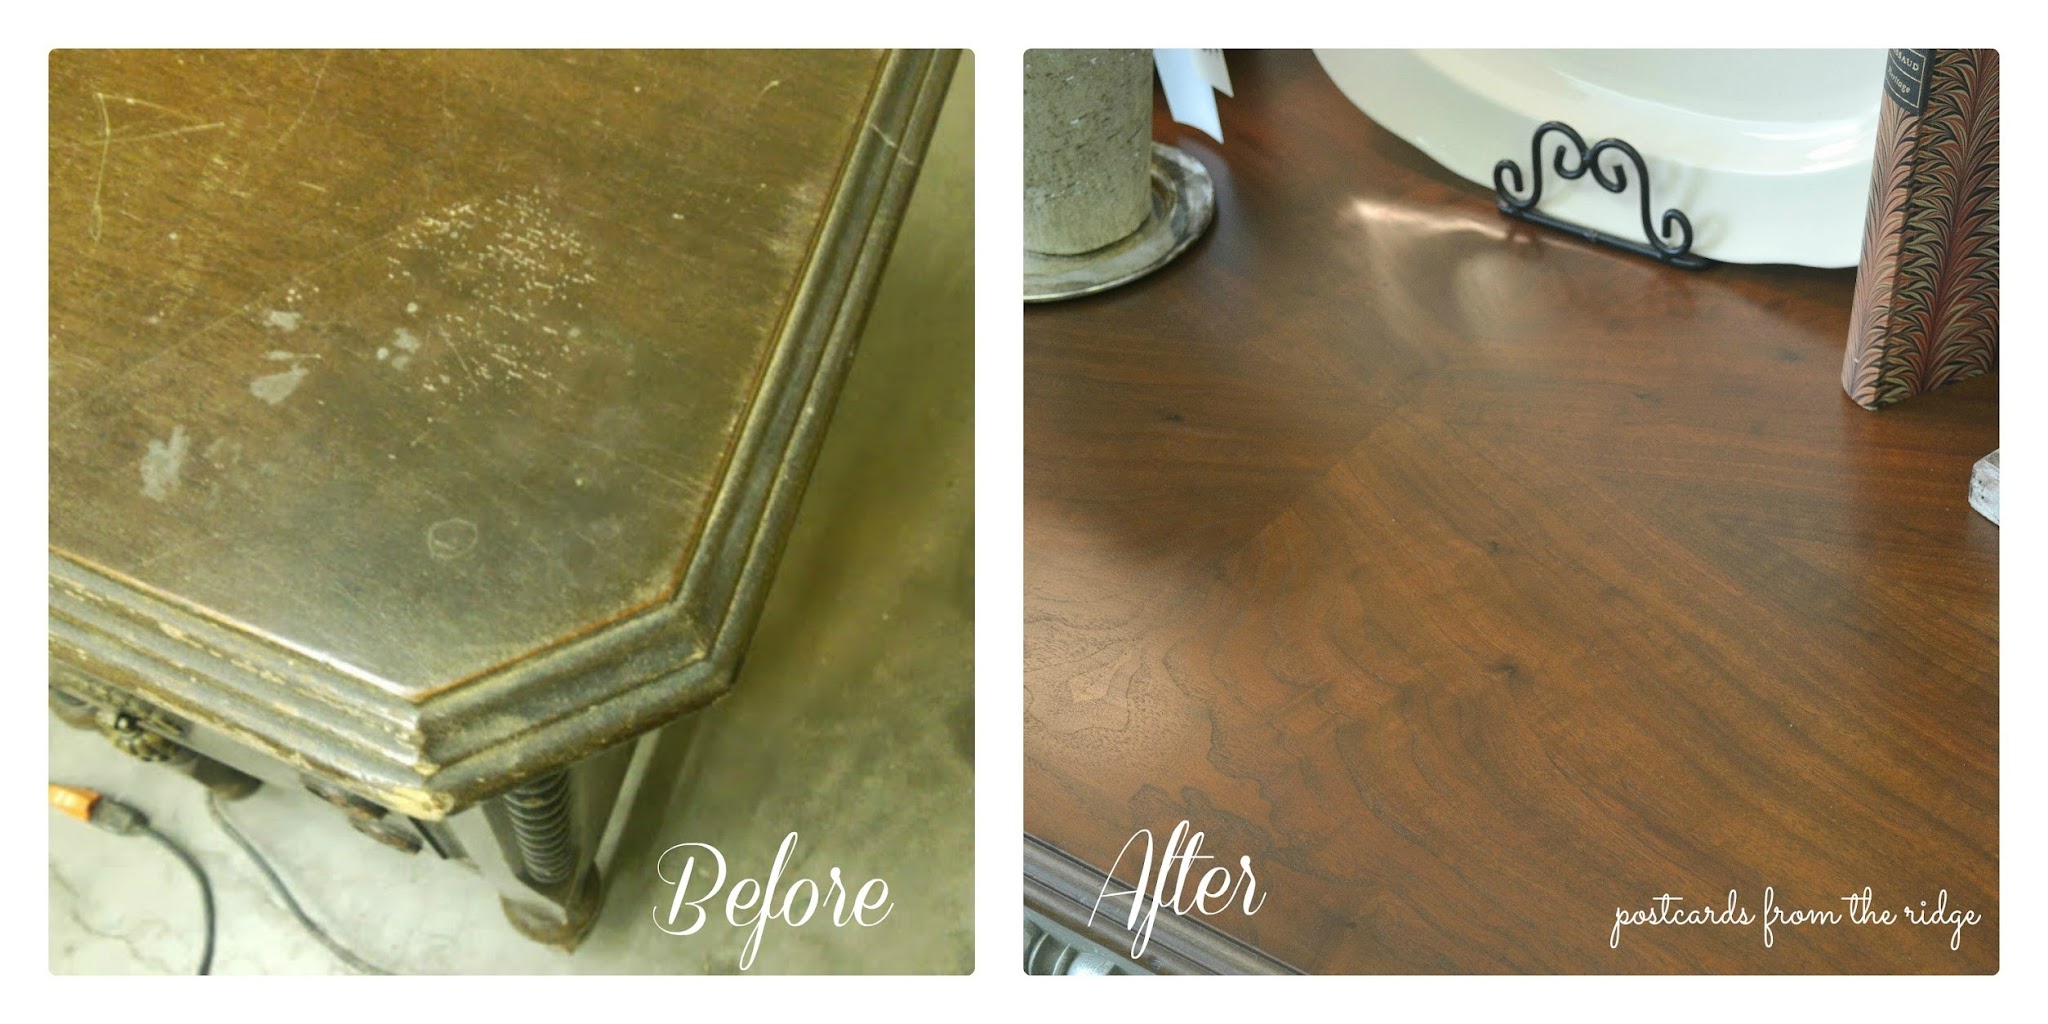 Postcards from the Ridge:  How to refinish furniture tutorial with complete instructions.